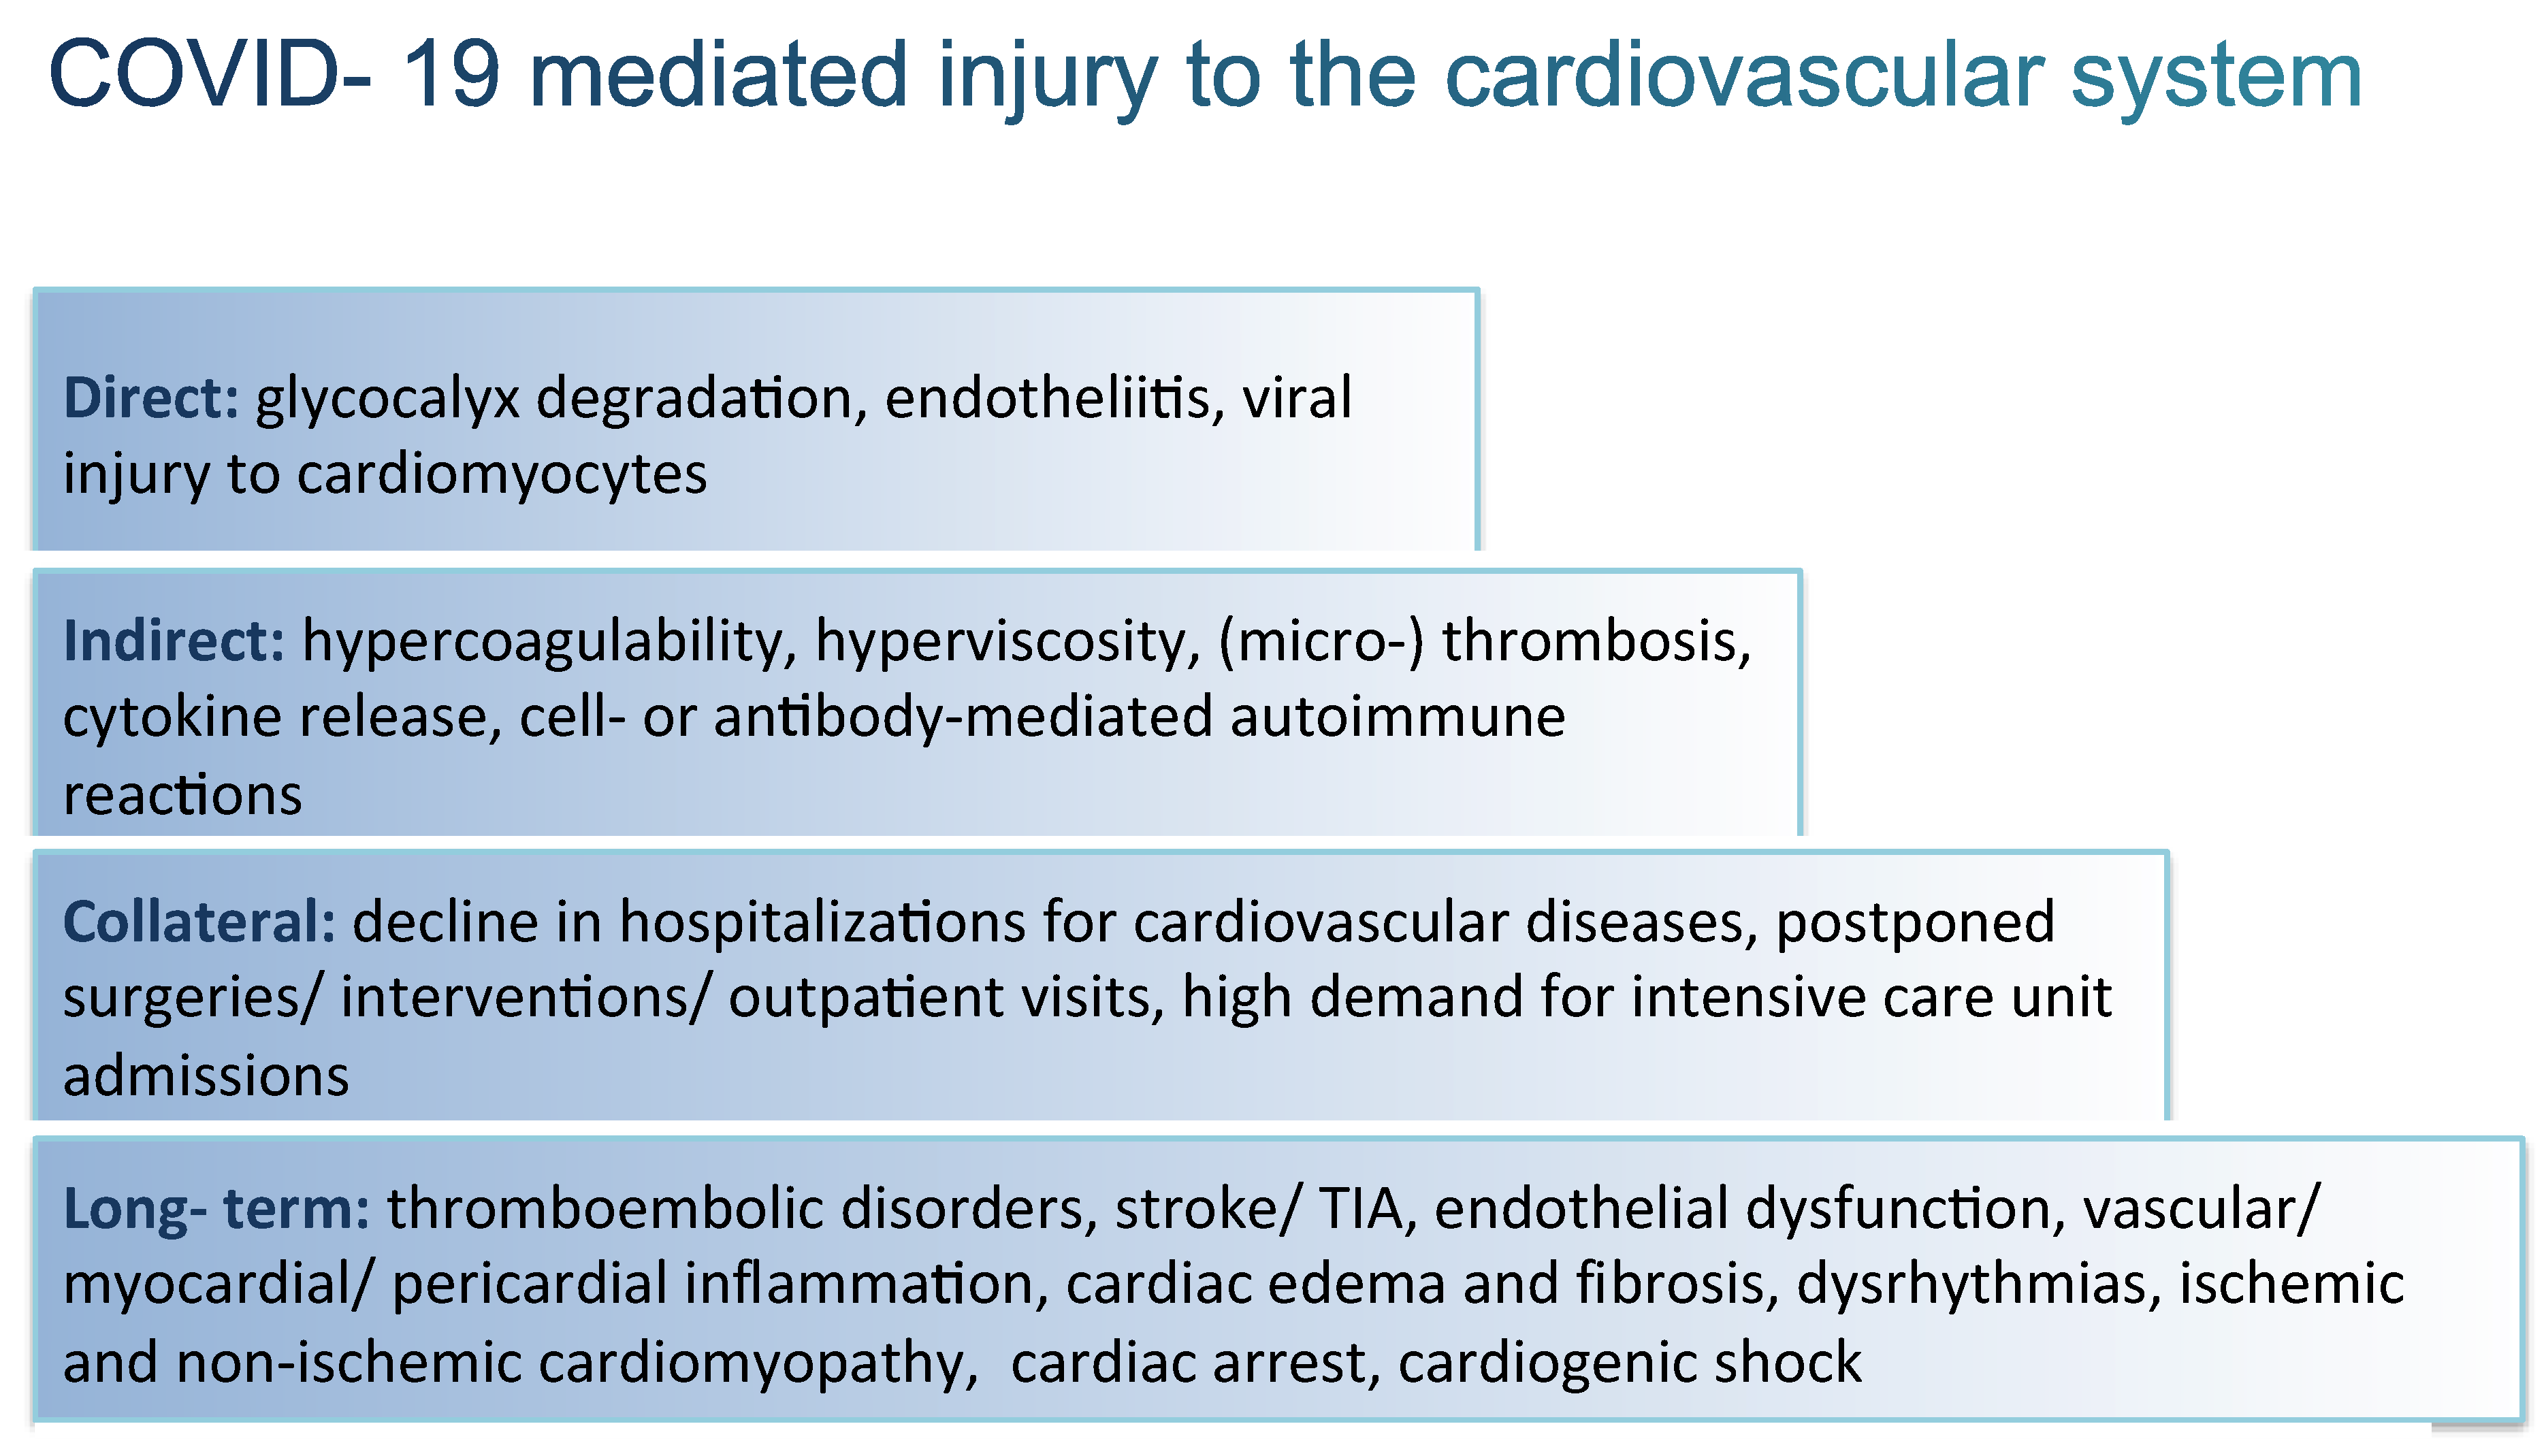 Long-term cardiovascular outcomes of COVID-19